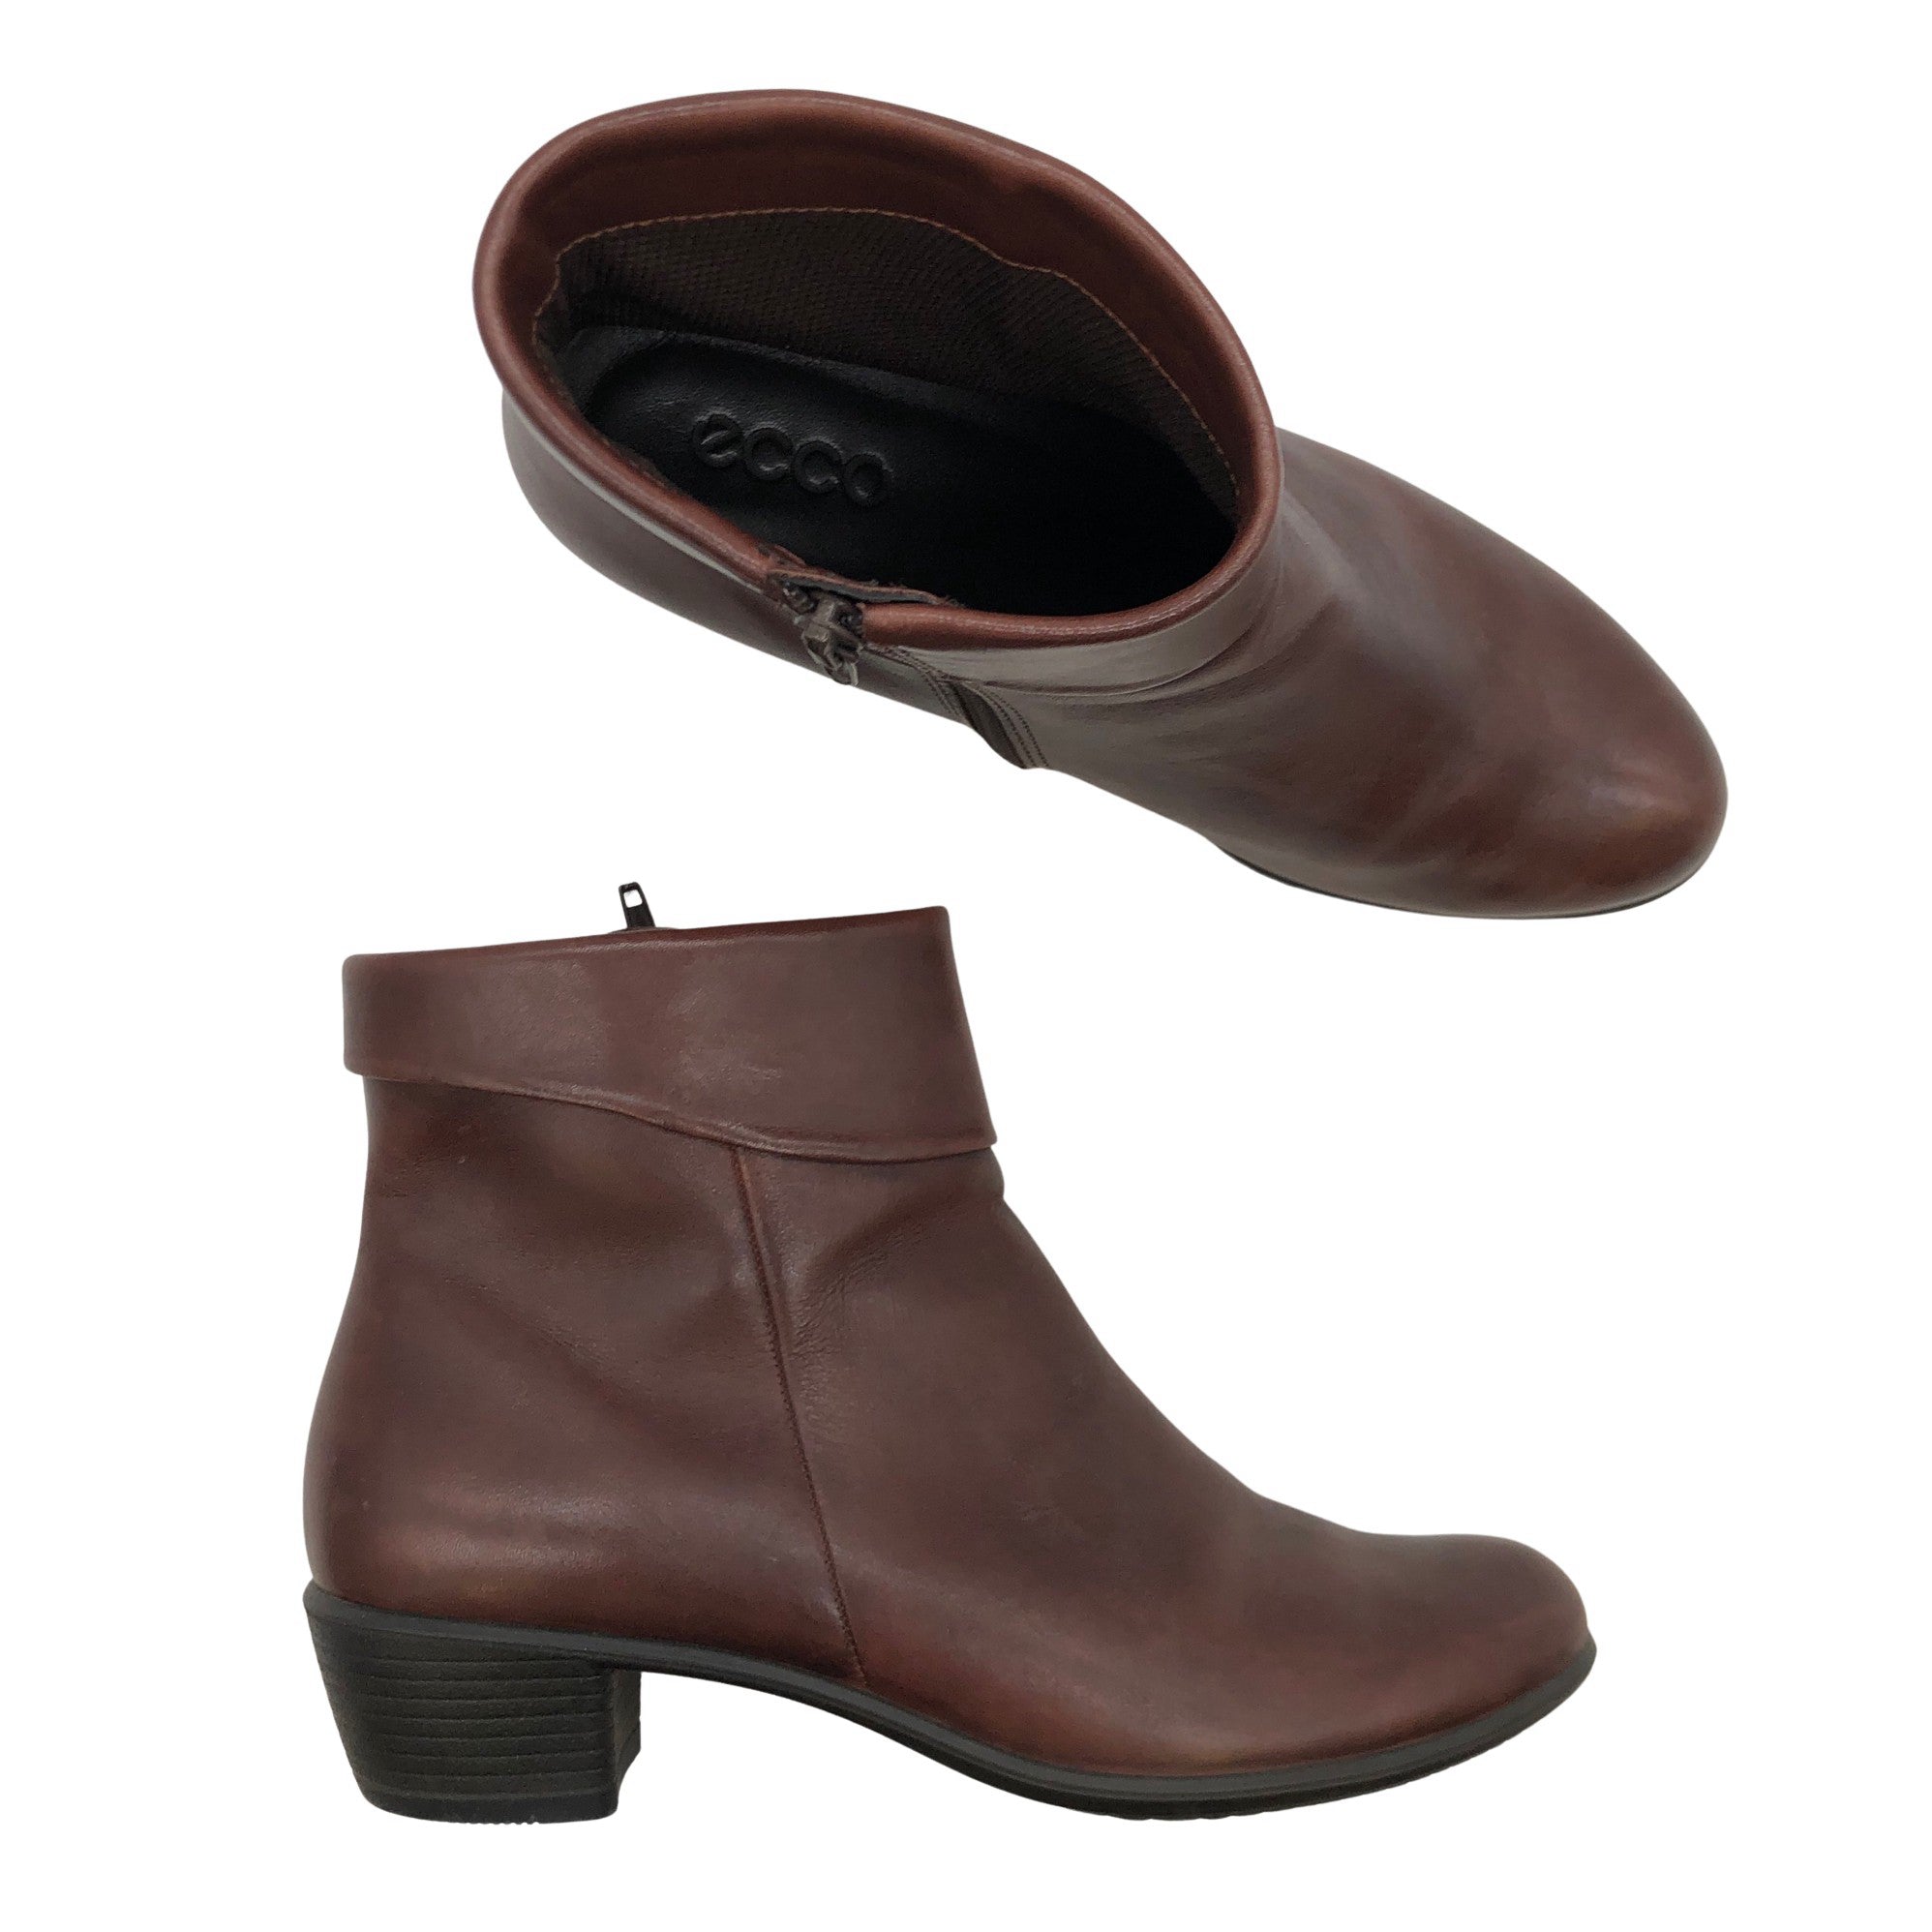 Women's Ecco Ankle boots, size 39 (Brown) |